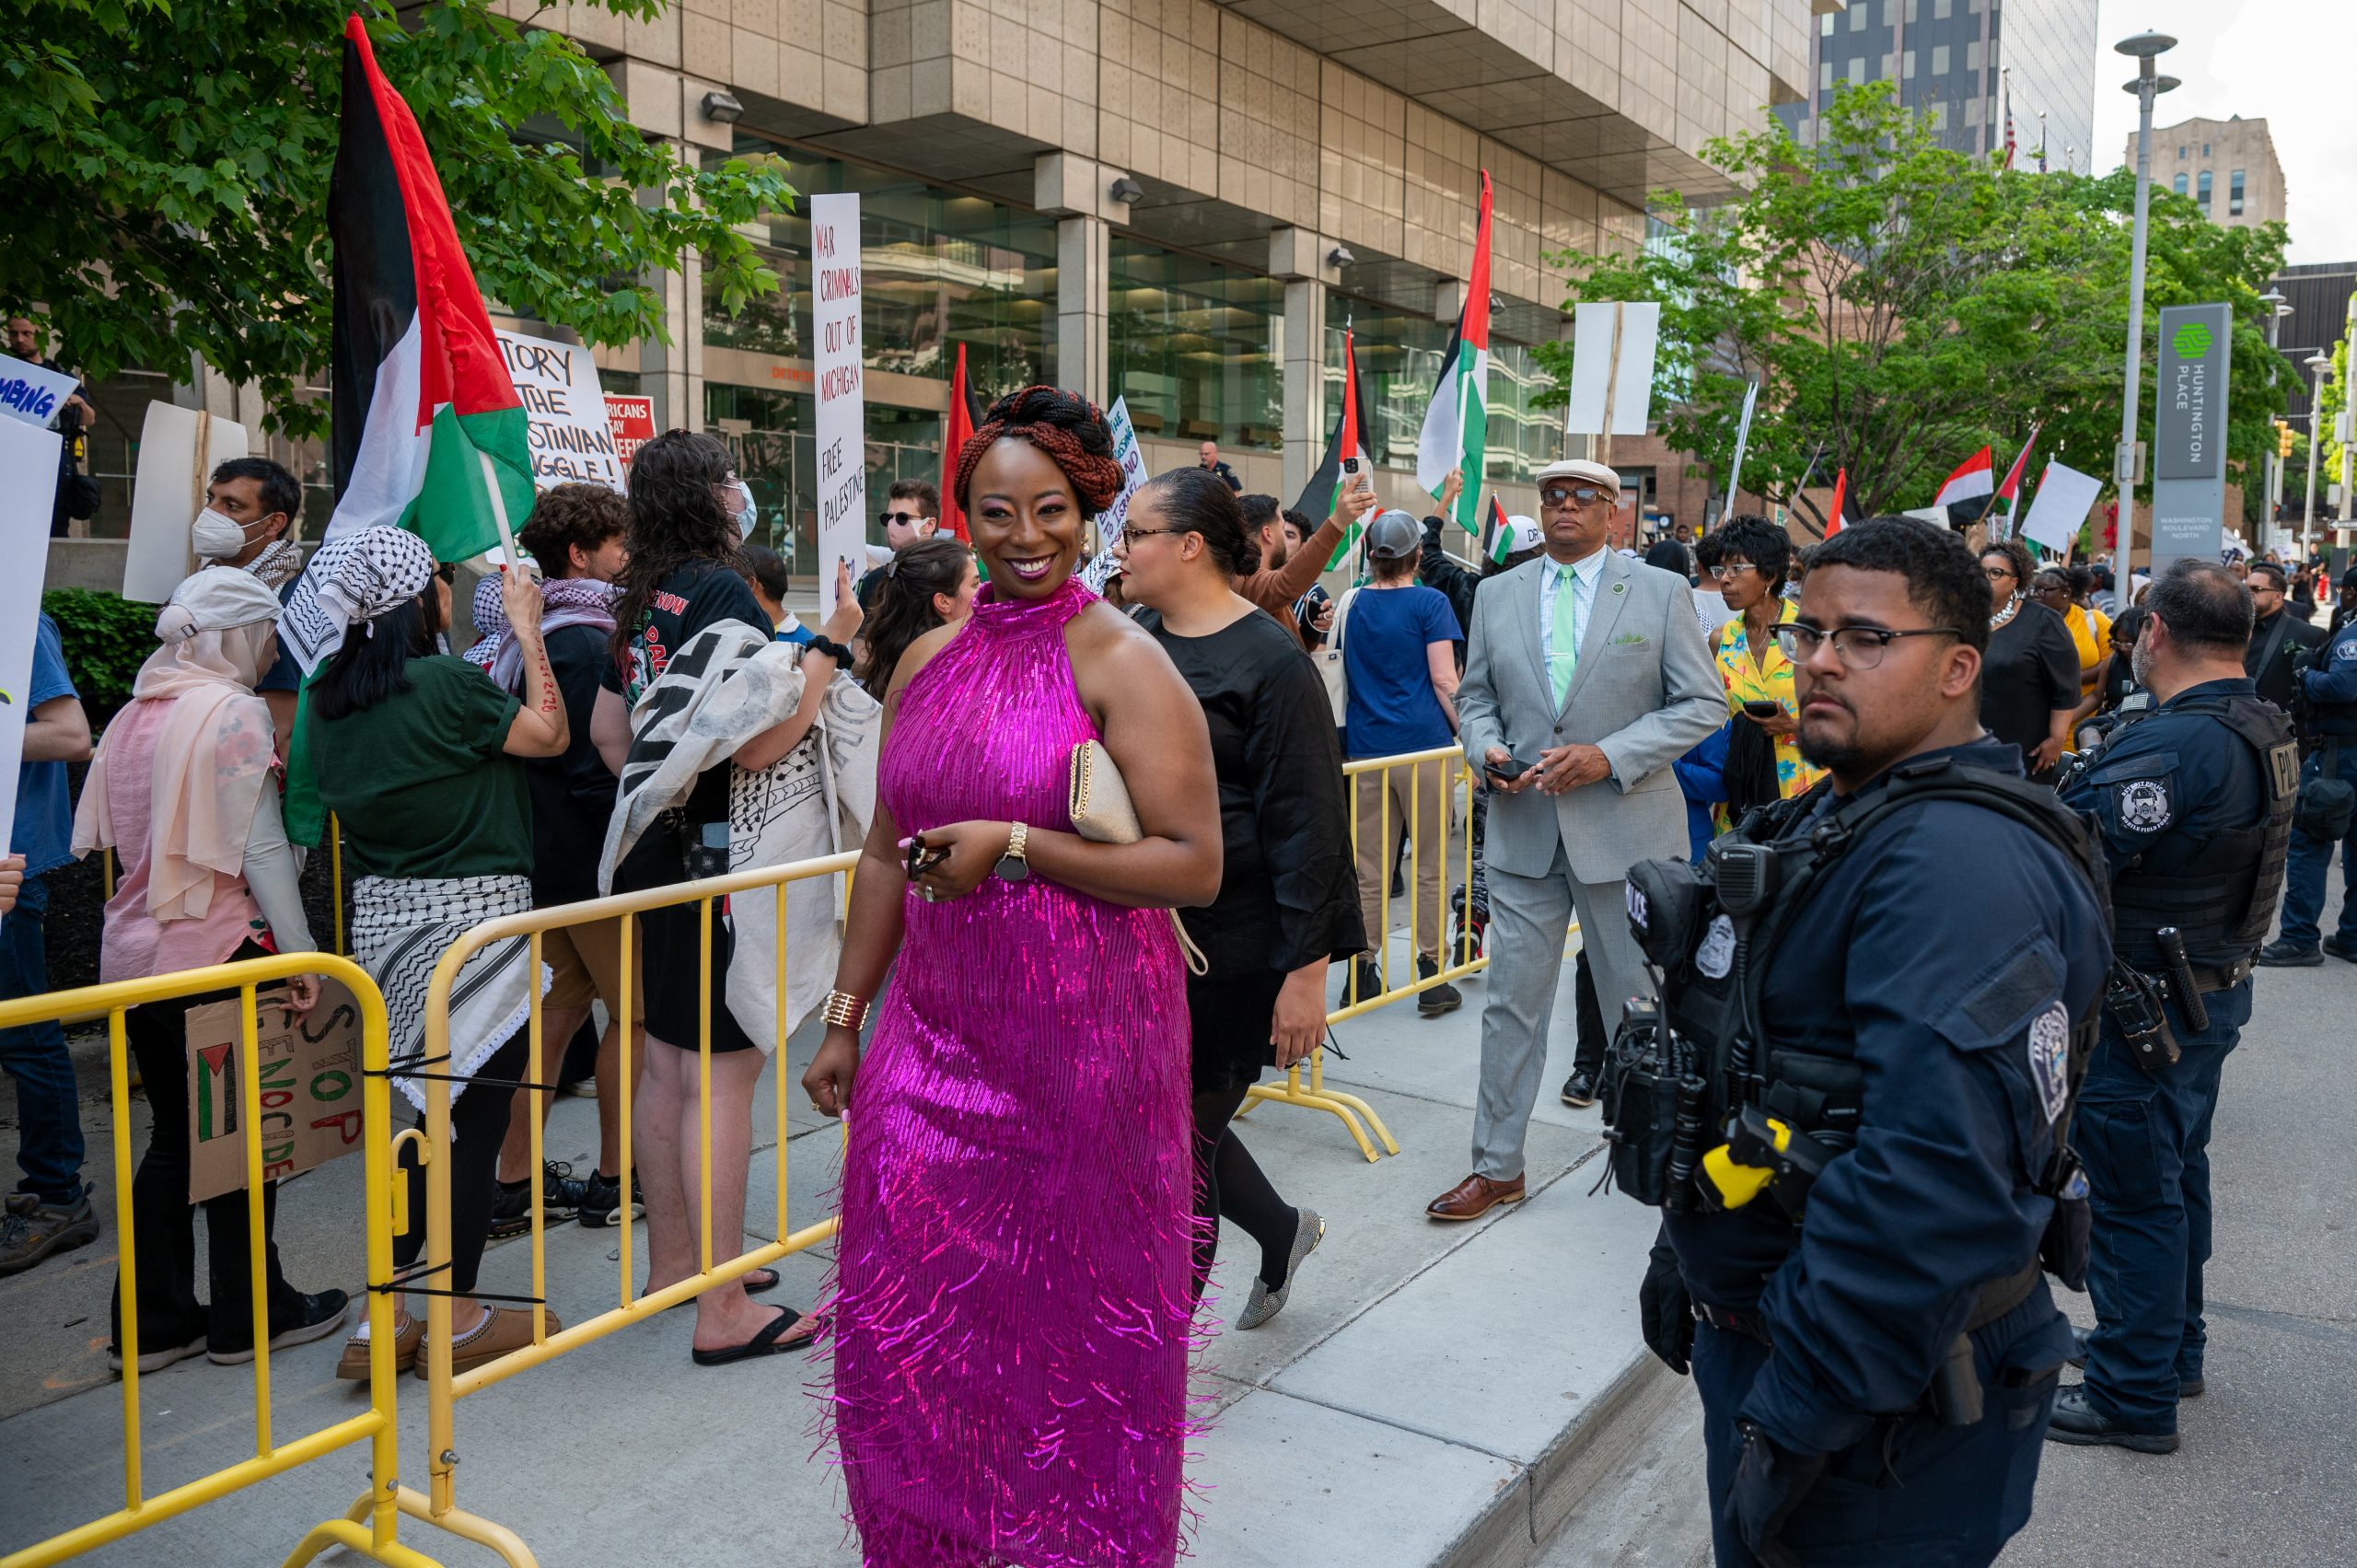 About 200 protesters gathered outside the NAACP’s Fight for Freedom Fund dinner at Huntington Place to show their dismay with Biden’s support for Israel’s ongoing military operation in Gaza.